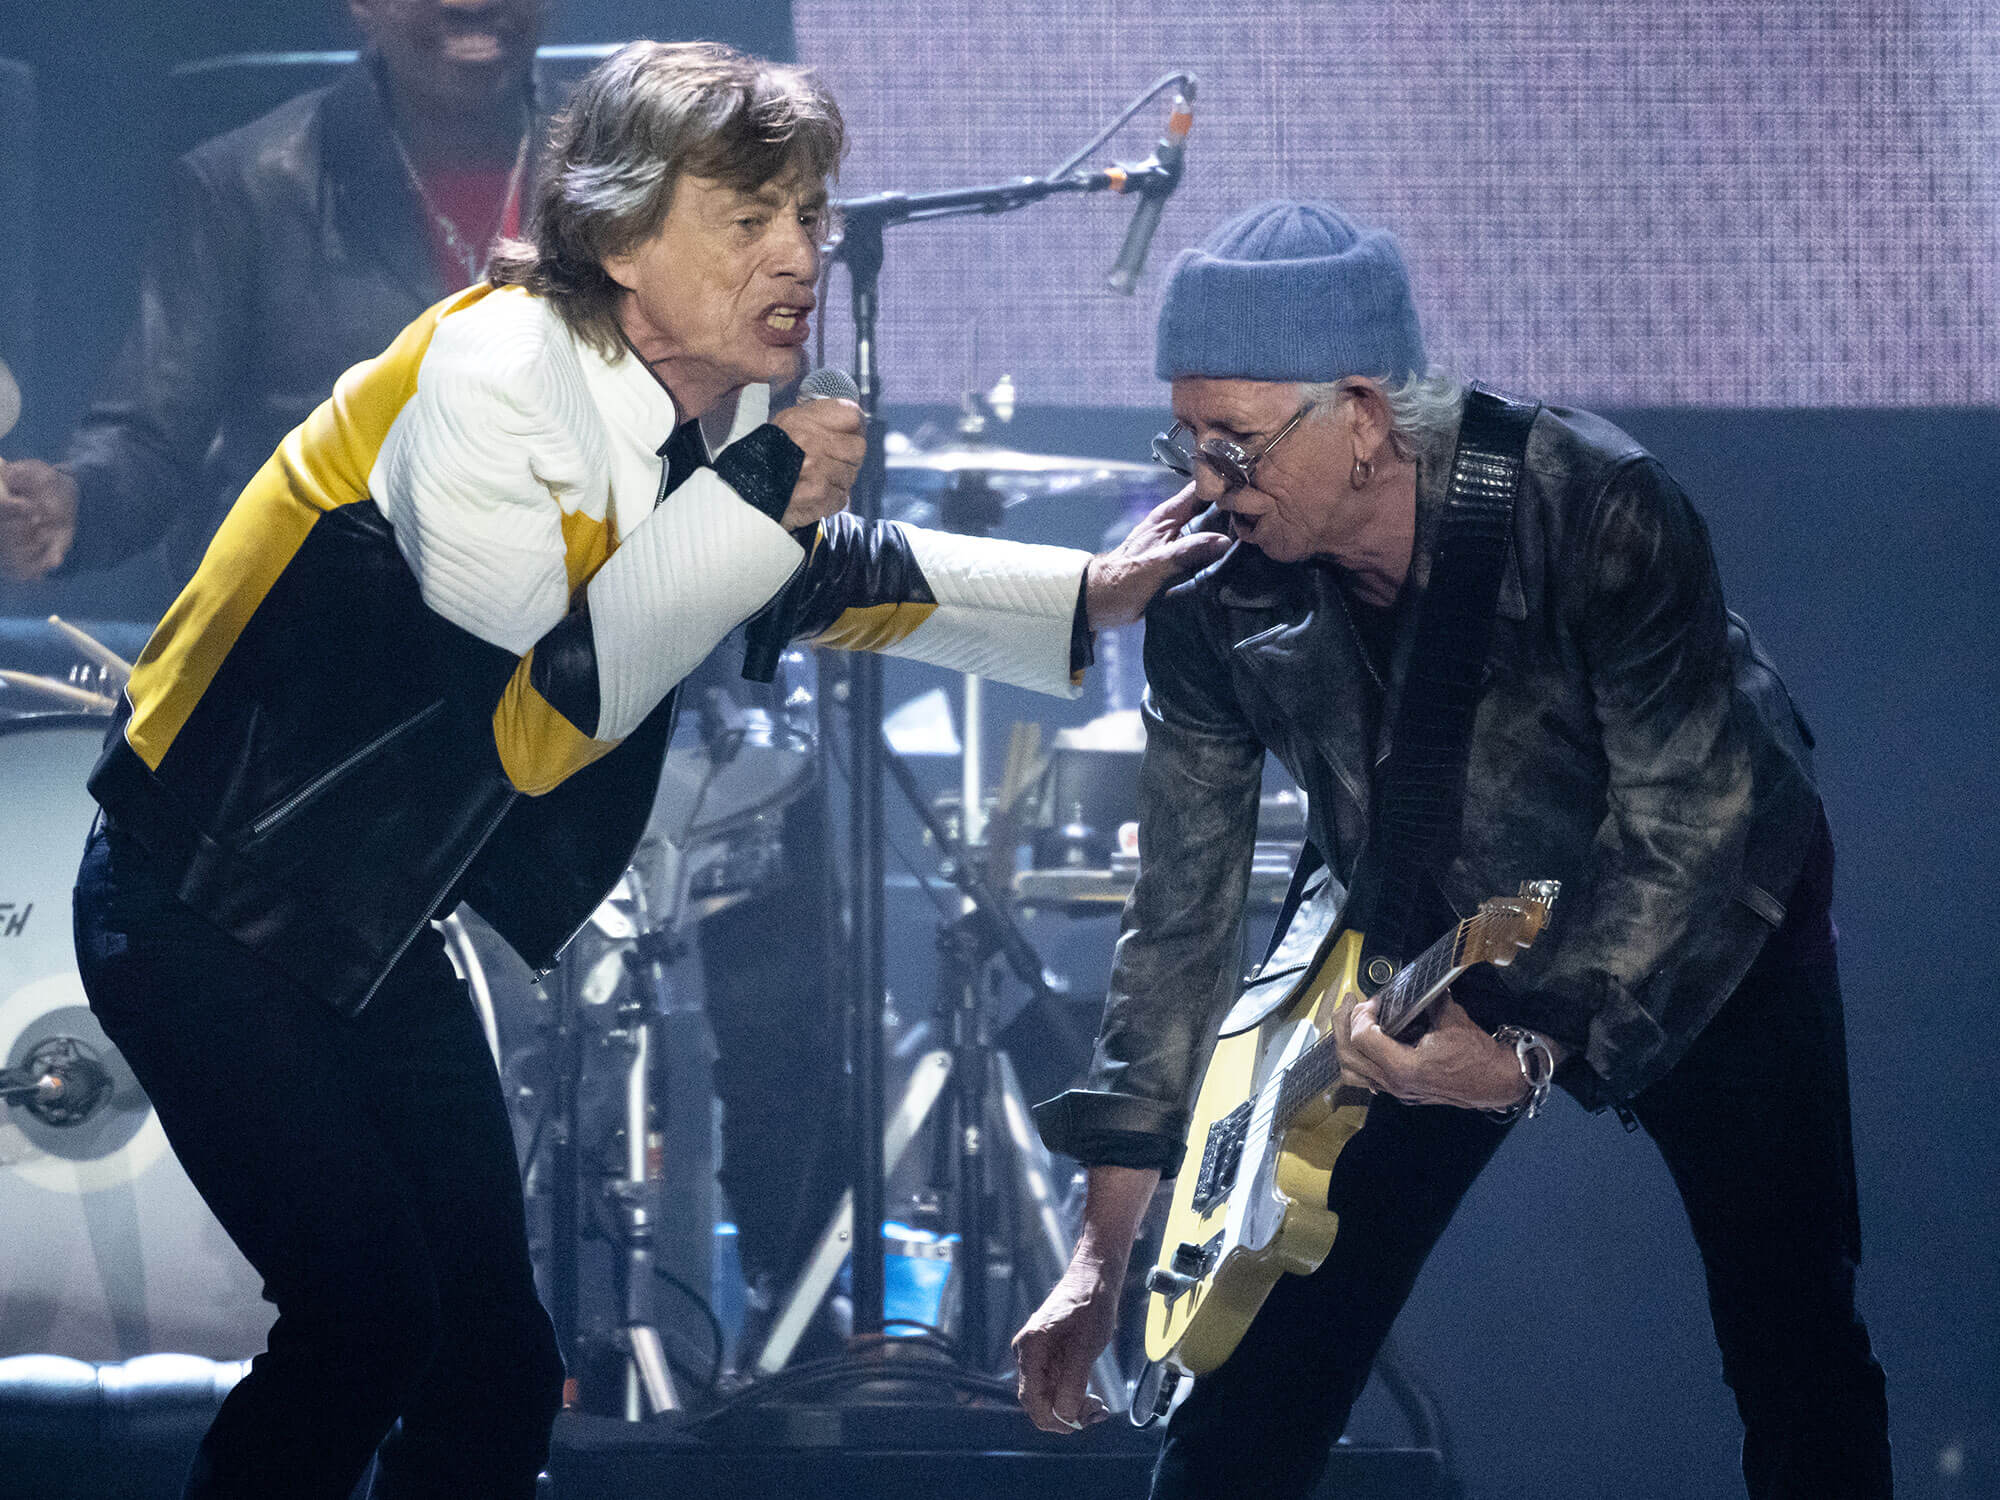 [L-R] Mick Jagger and Keith Richards performing live